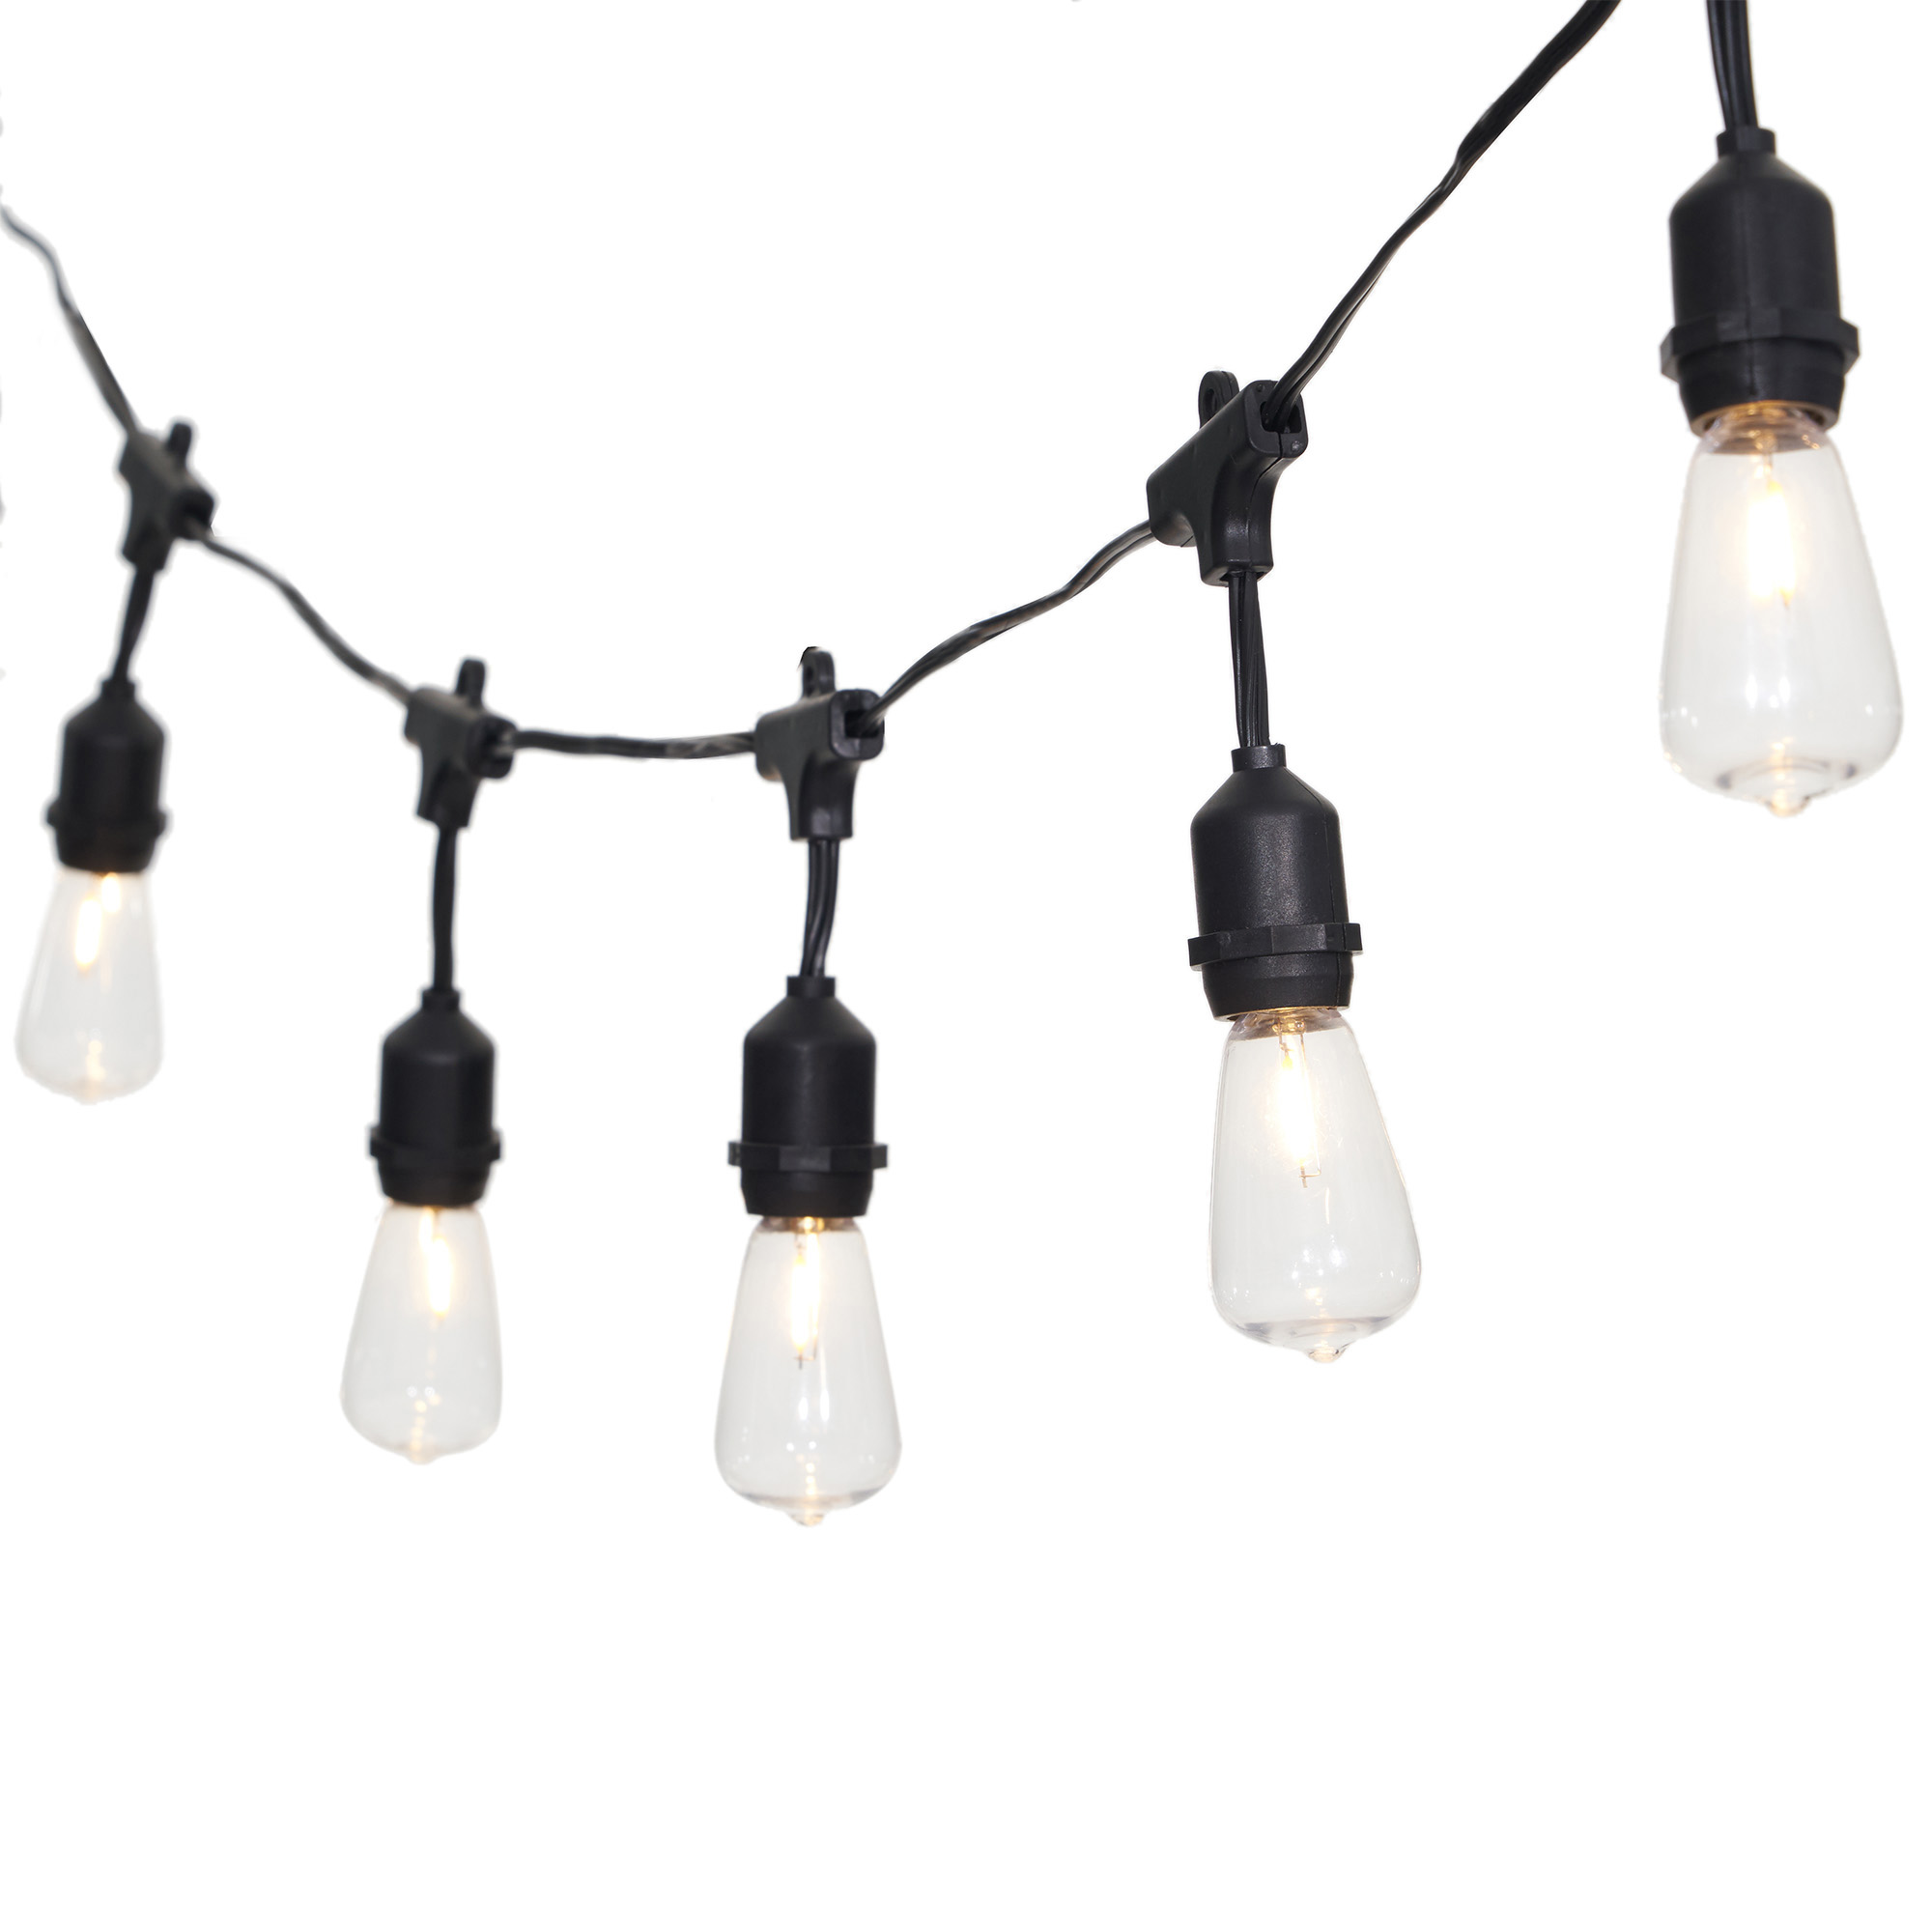 Better Homes & Gardens 15-Count Shatterproof Edison Bulb Outdoor String Lights with Black Wire - image 5 of 8